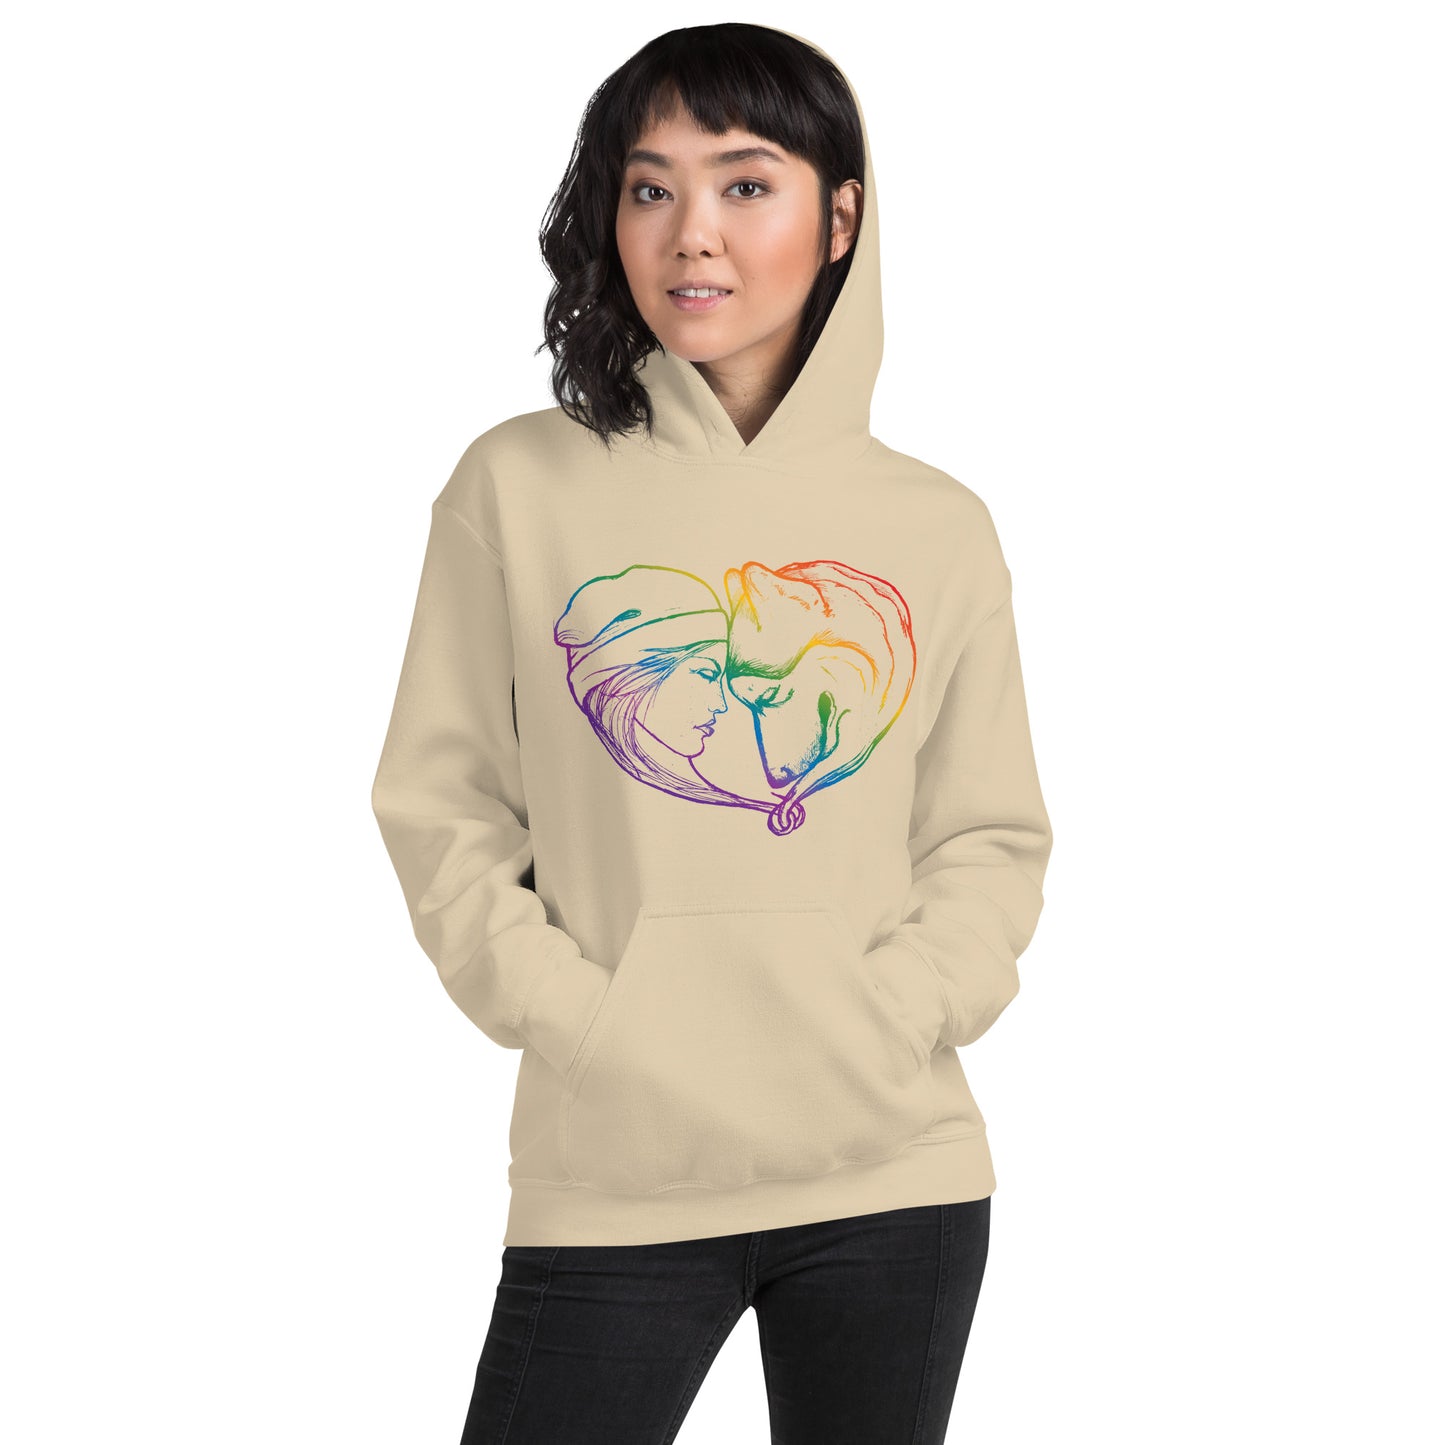 Girl and Her Dog - Malamute - Husky - Pullover Hoodie